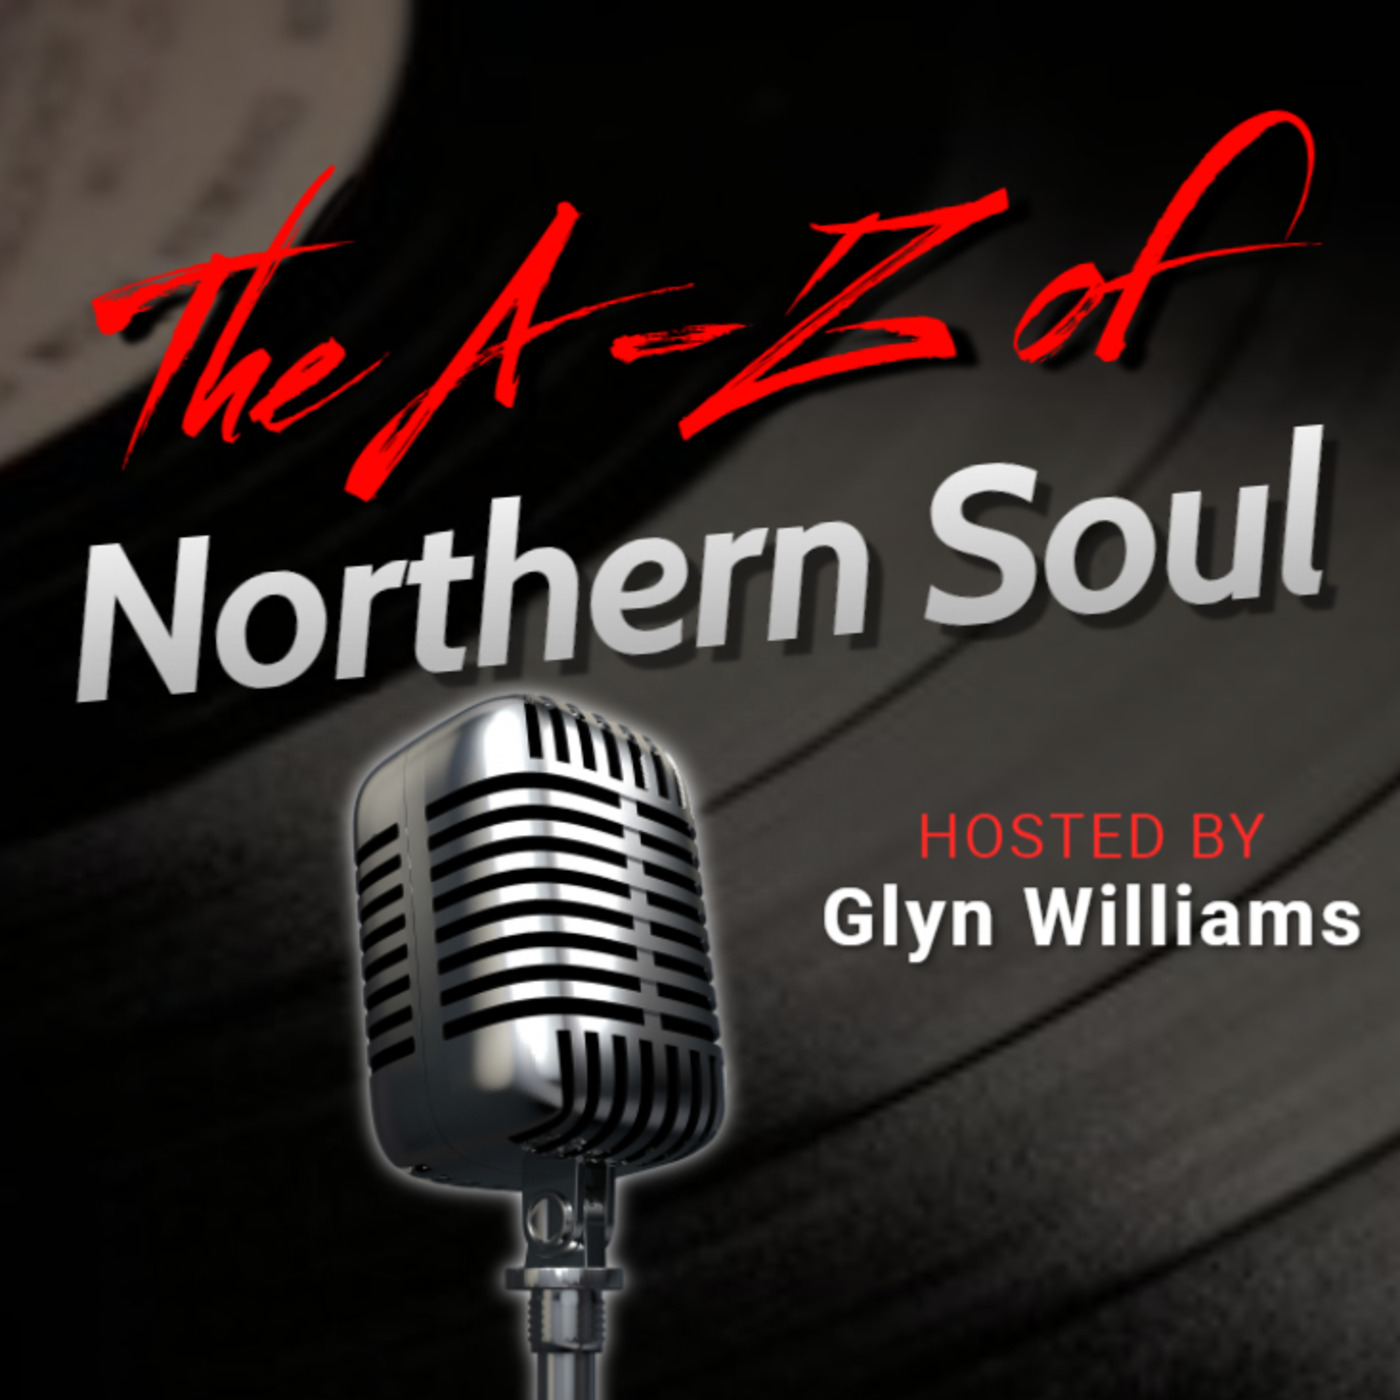 The A-Z of Northern Soul E080